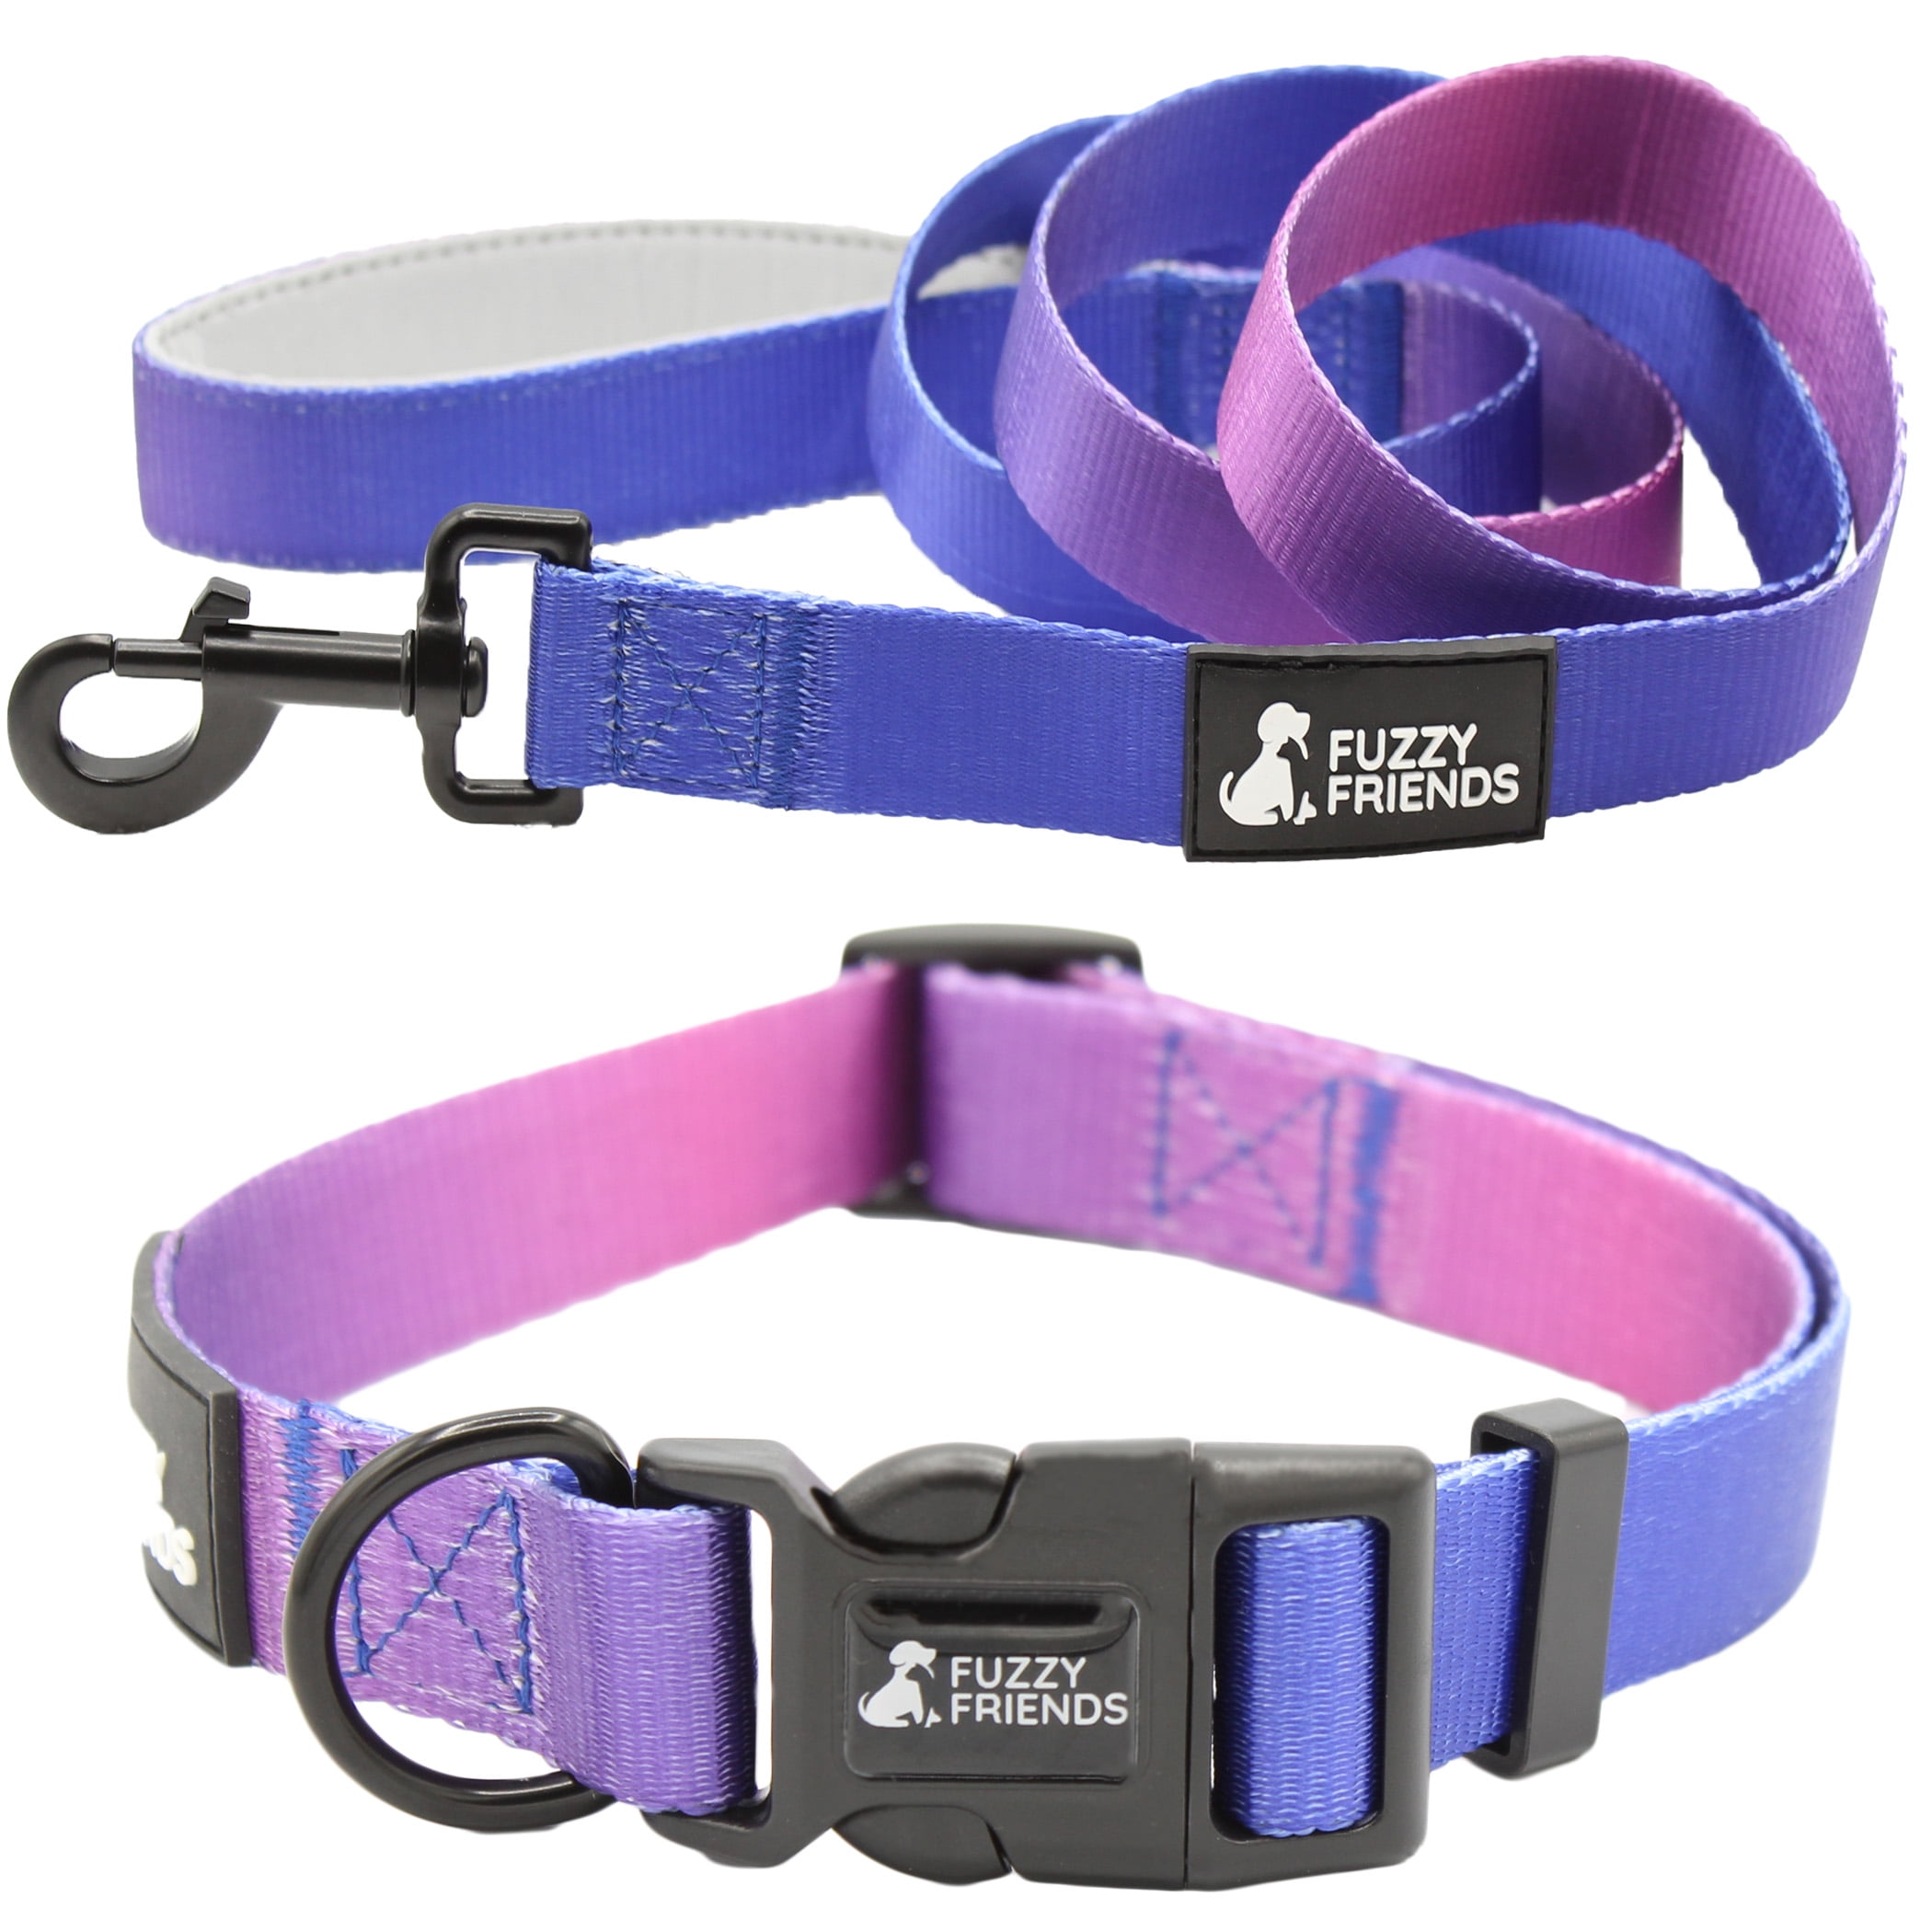 Fuzzy Friends purple mood ombre dog collar with optional matching leash  set. A cool, luxury dog collar with boho, tie dye colors. 